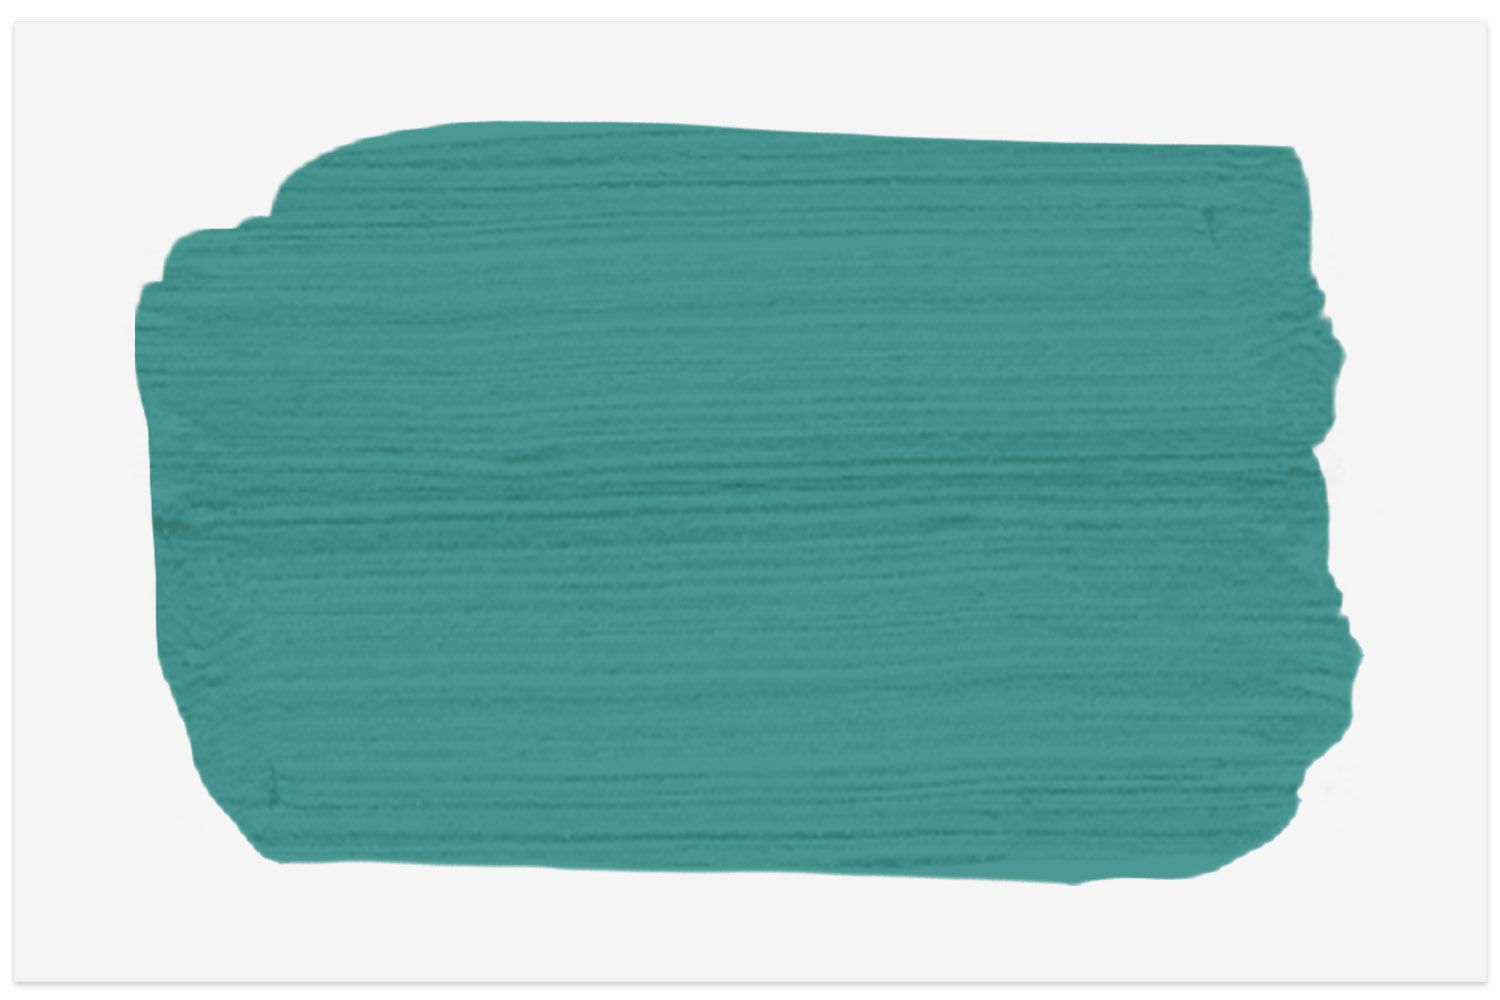 Dreamy Teal paint swatch from Valspar